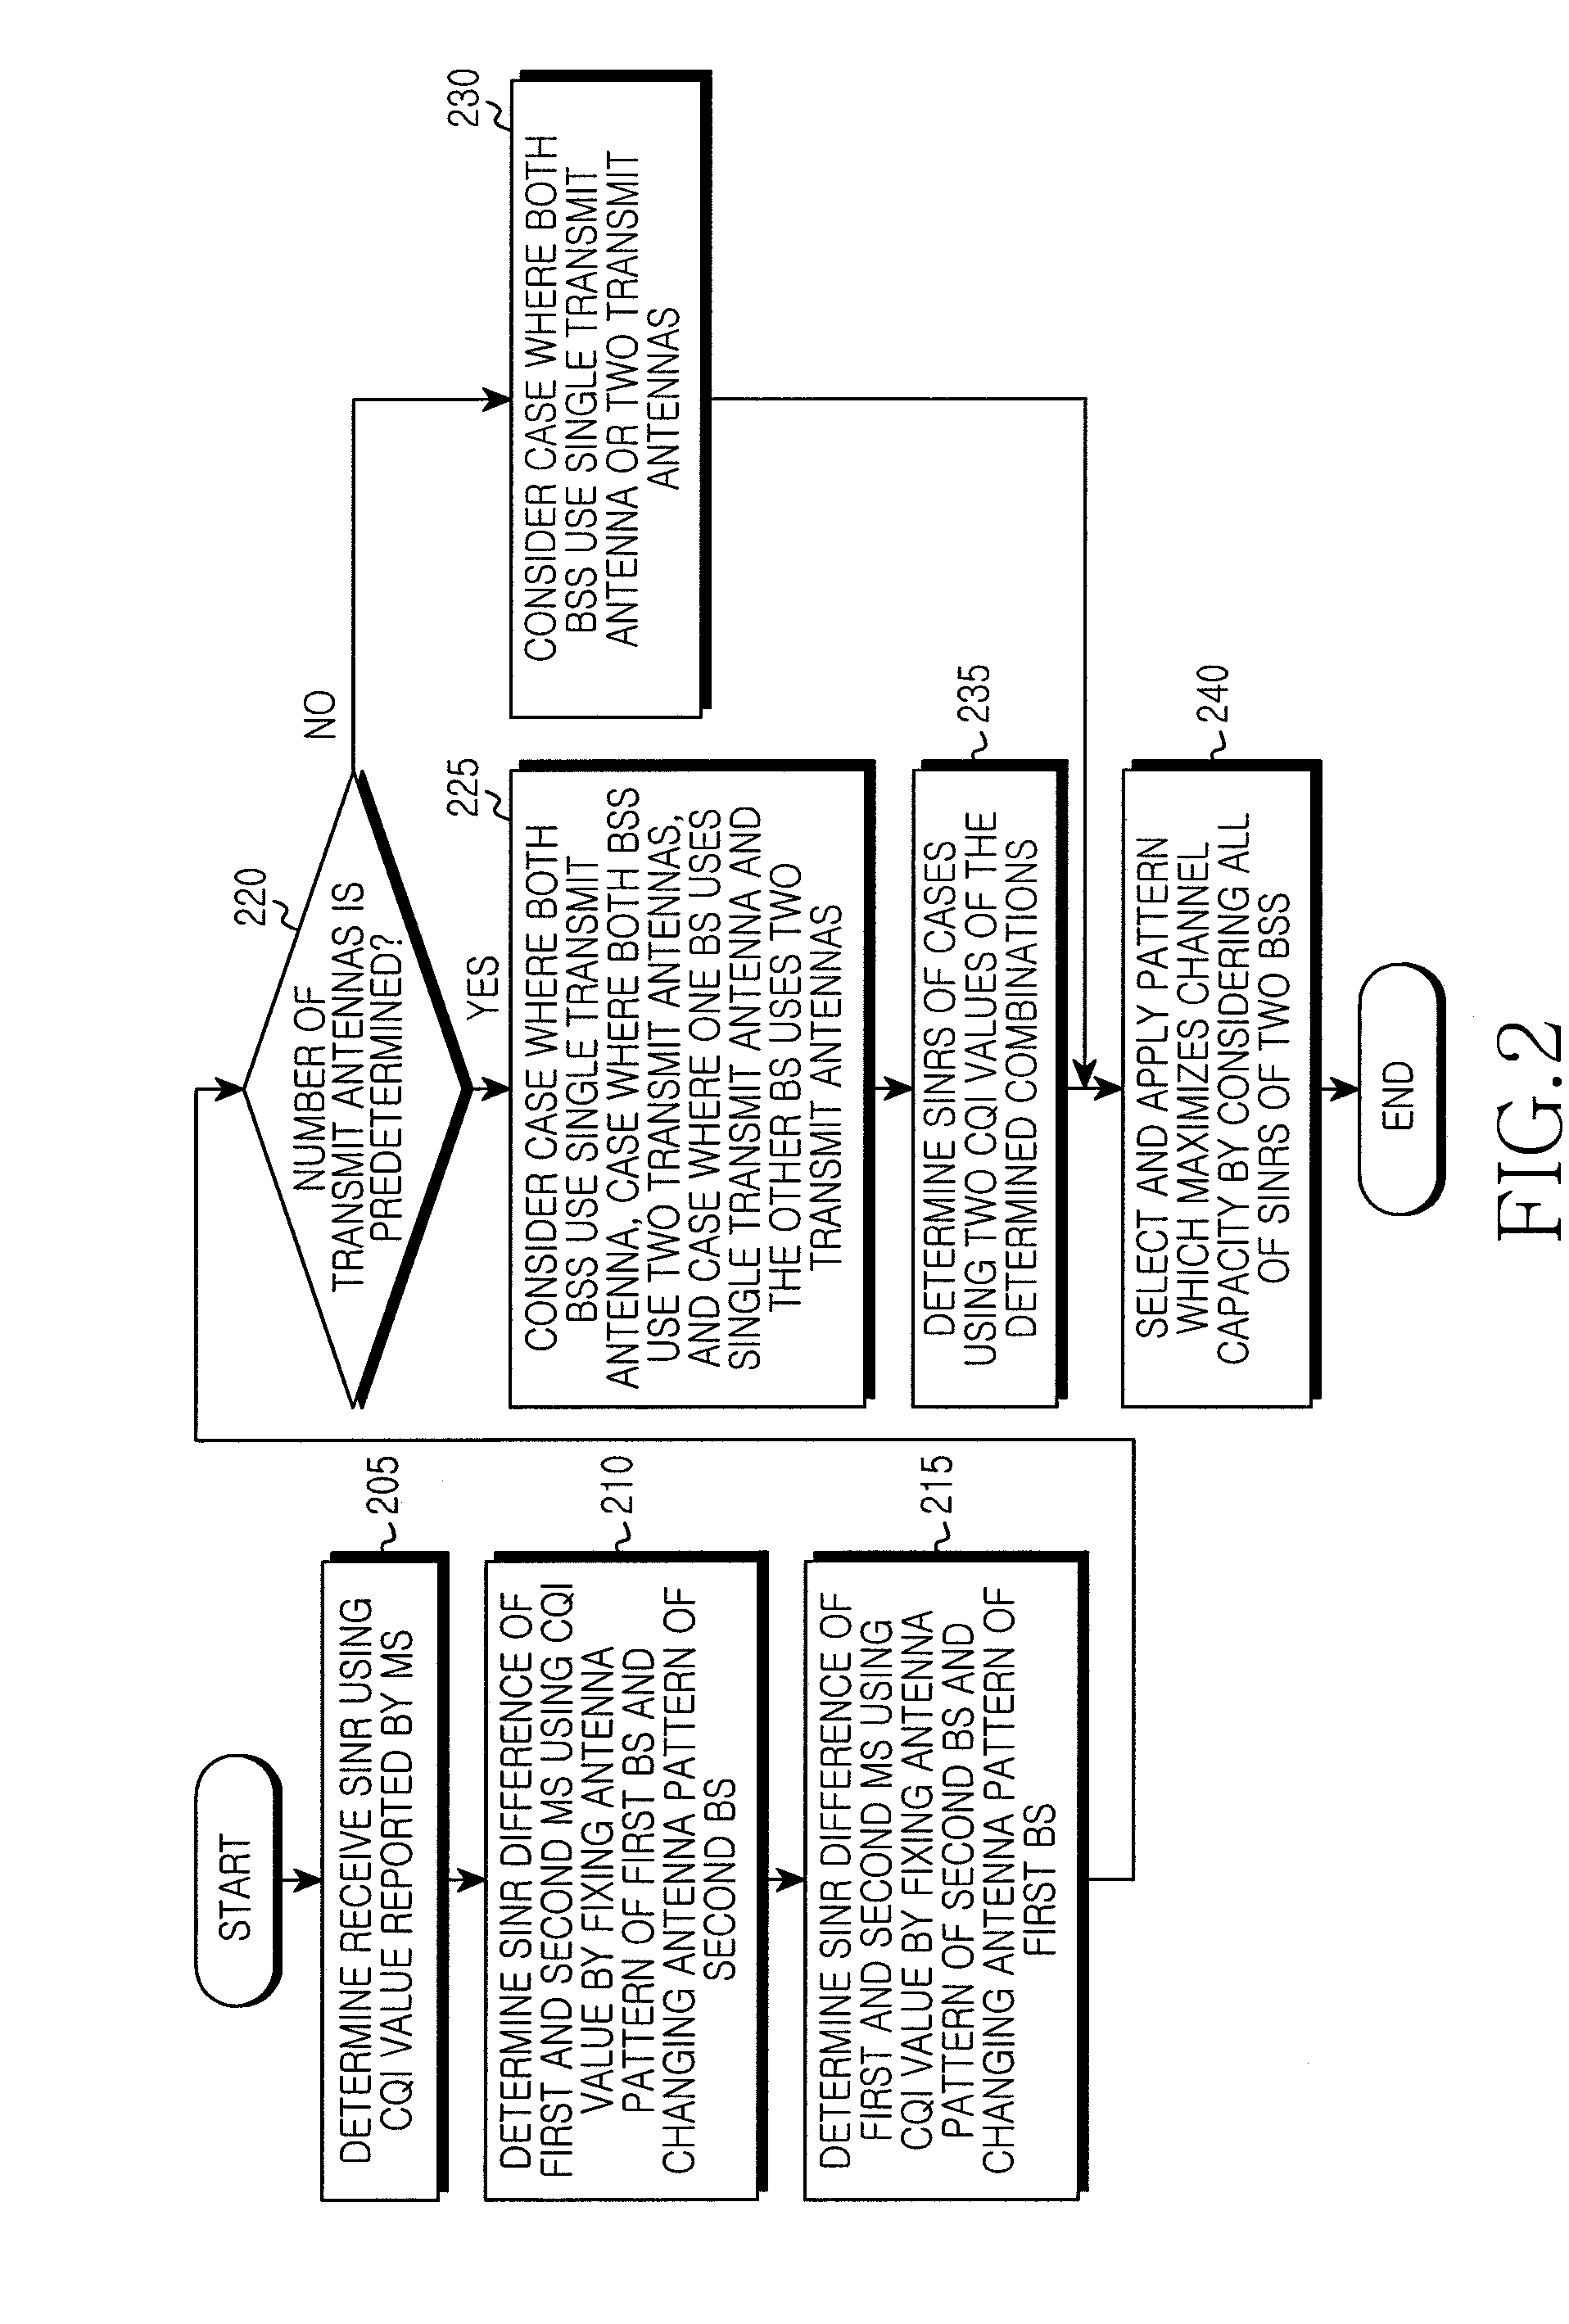 Method and apparatus for down link interference cancelation between adjacent base stations in base station with reconfigurable antenna